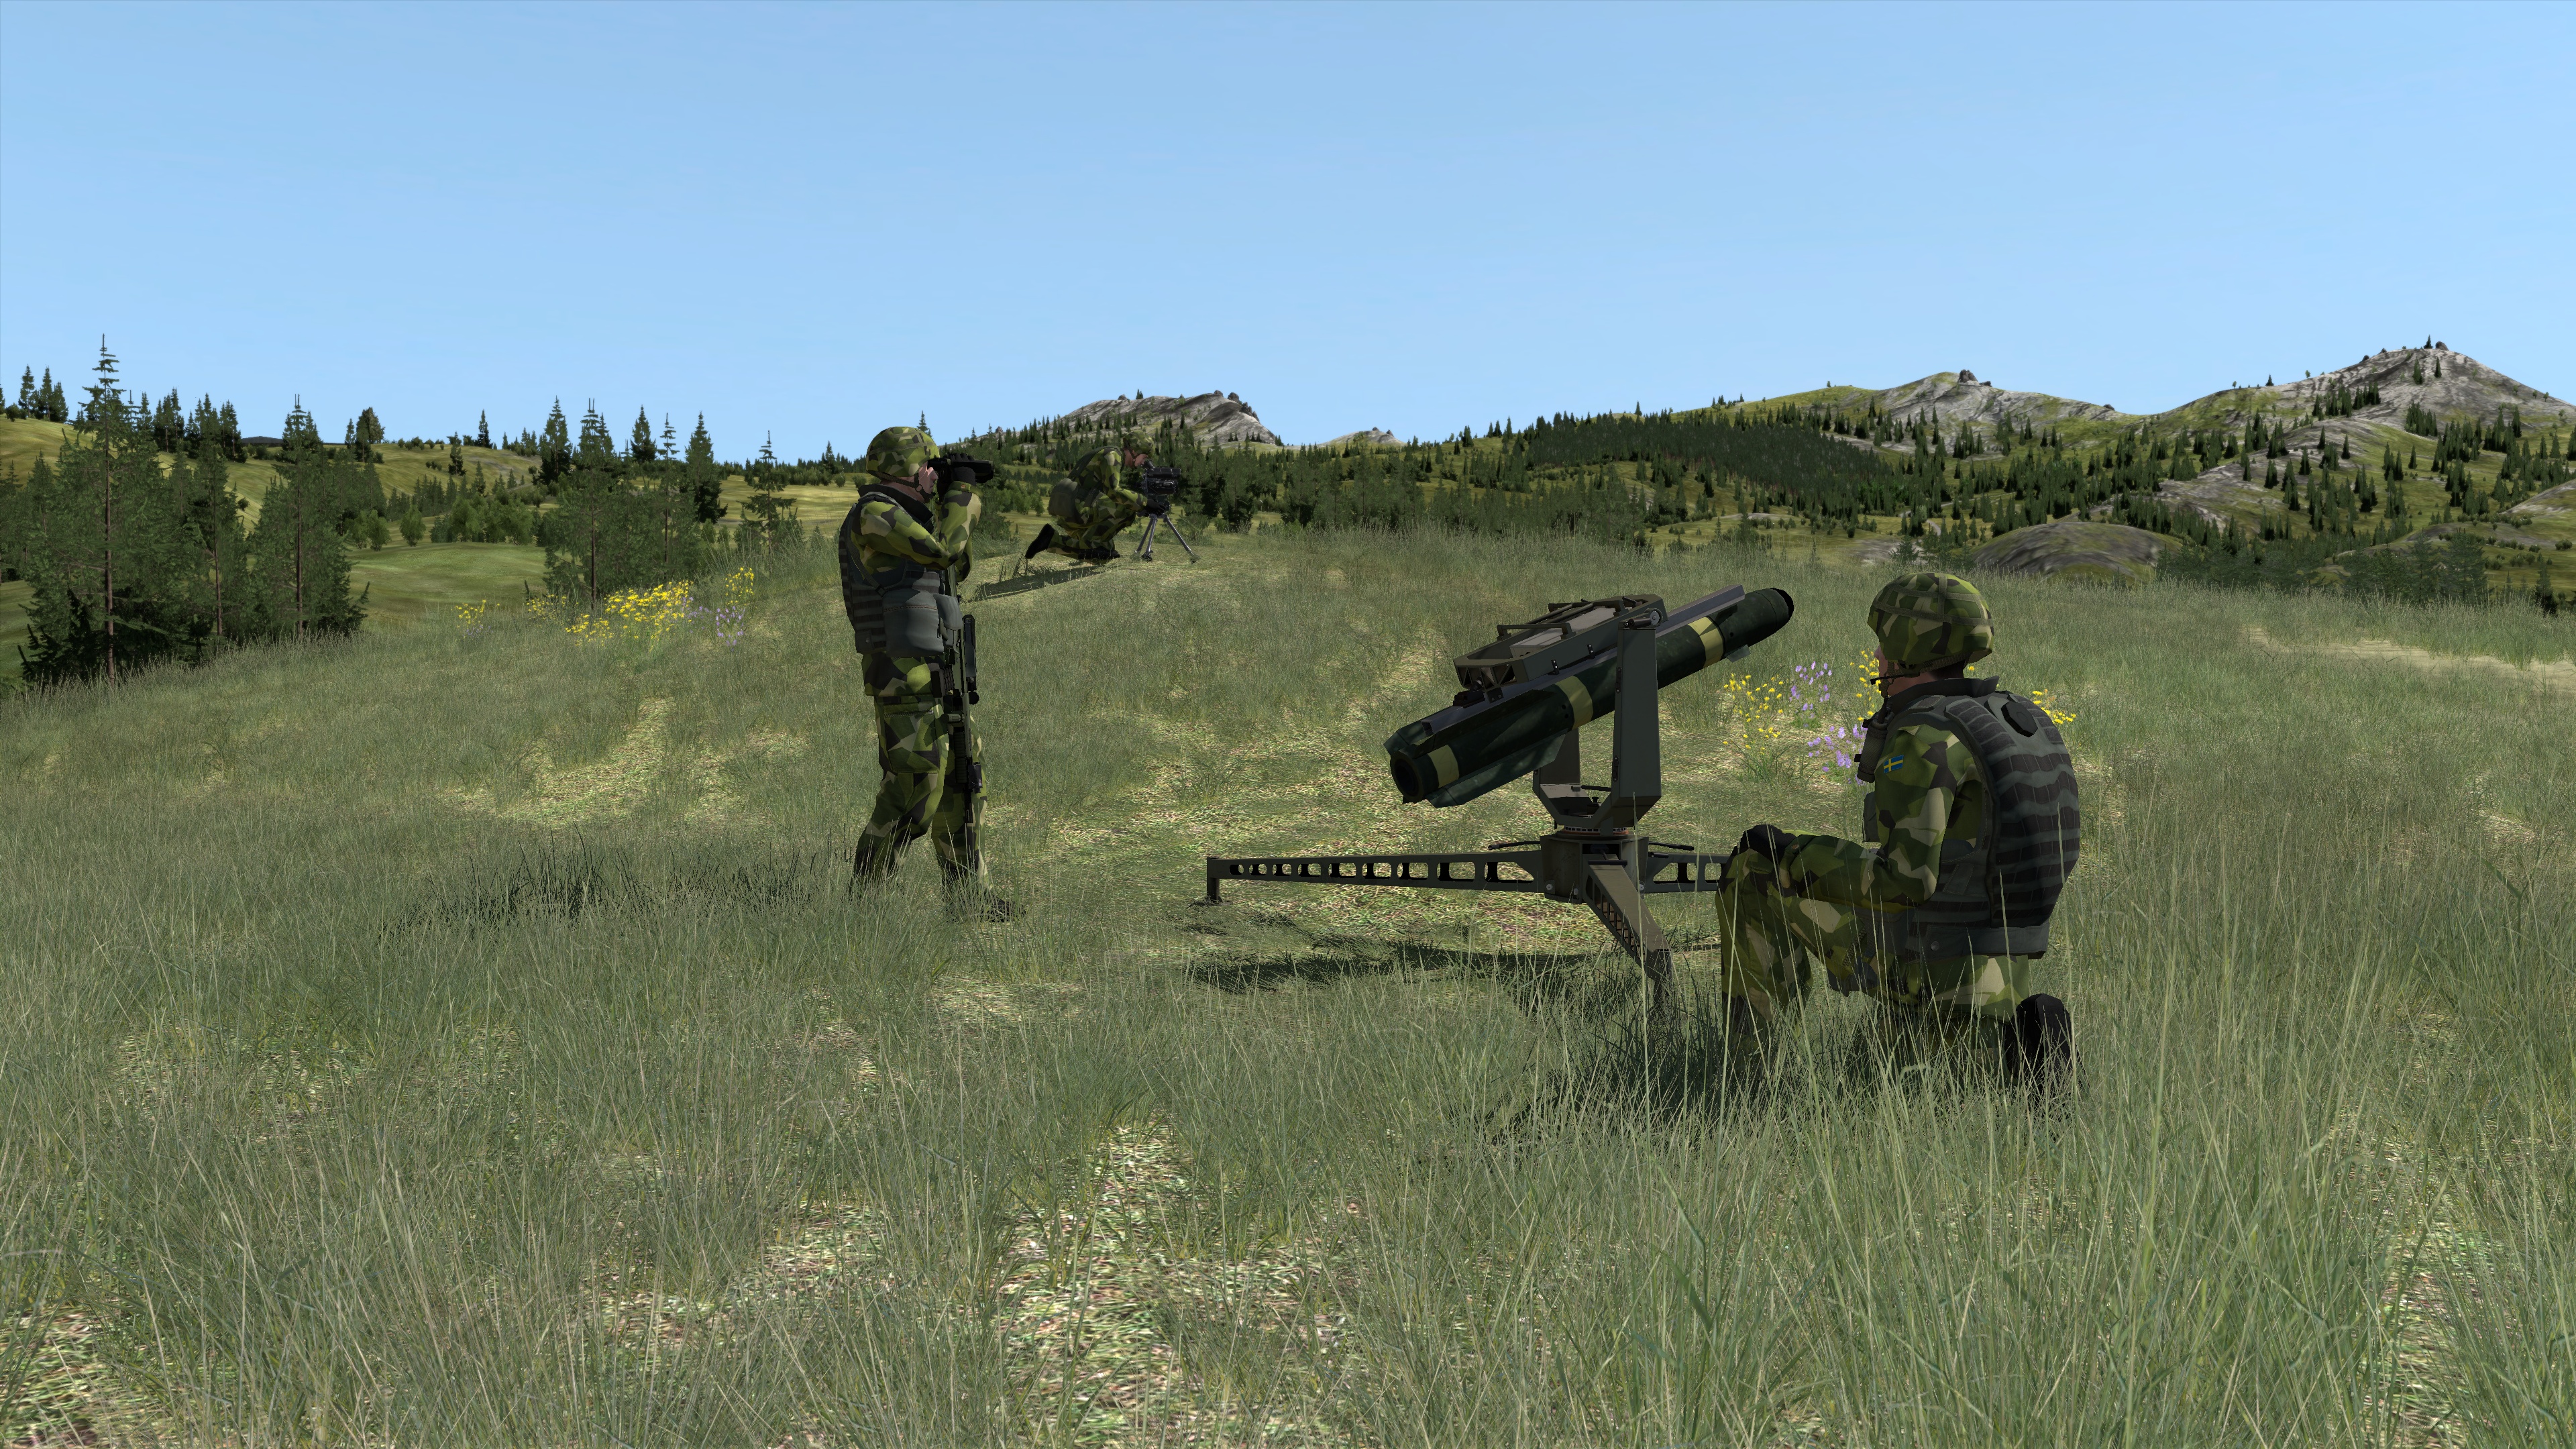 Swedish Army 3D models in VBS3 for forward observer training